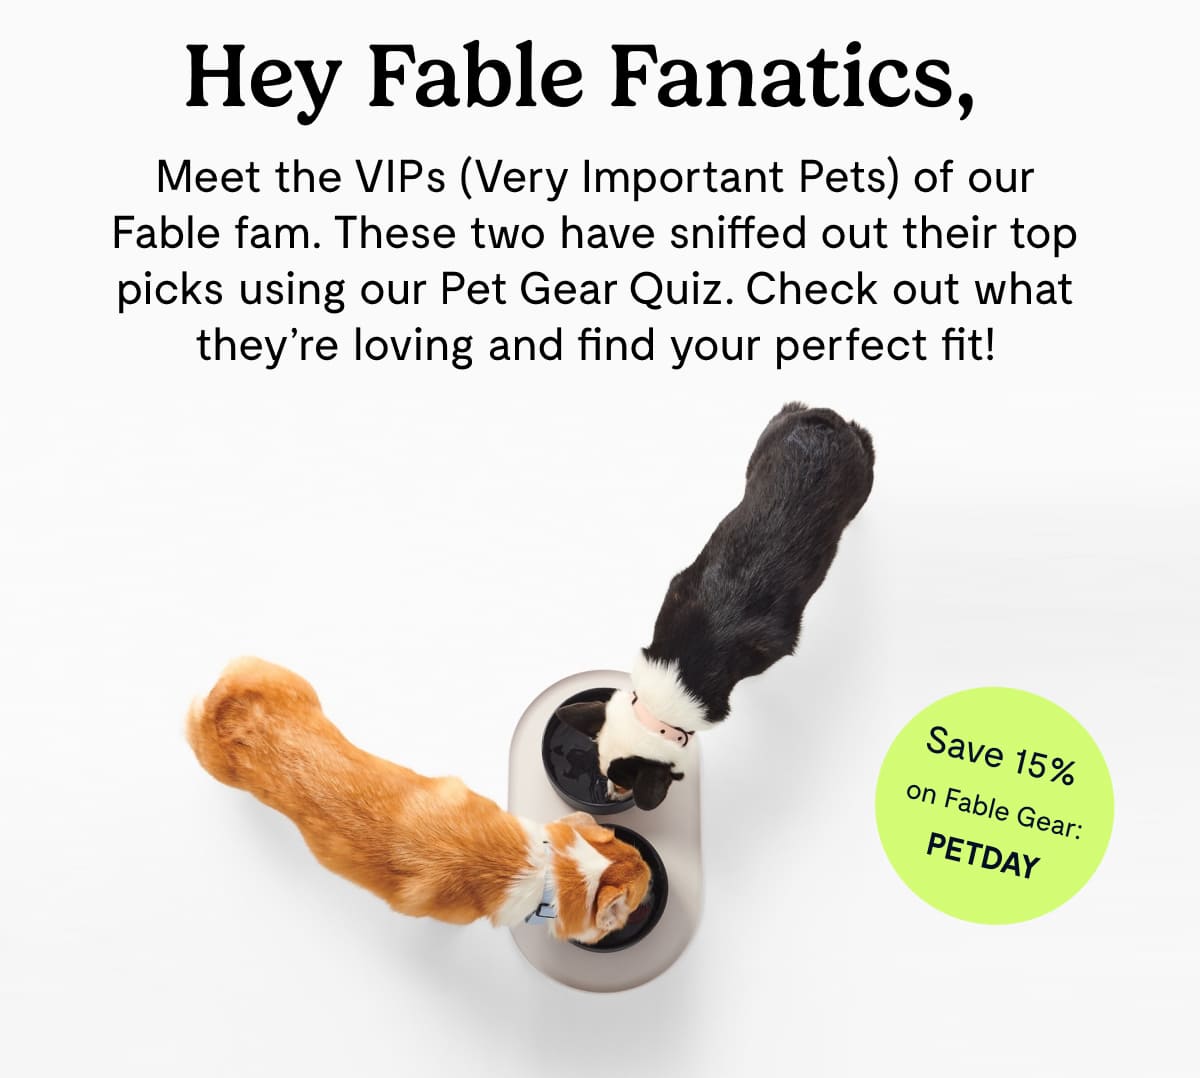 Meet the VIPs (Very Important Pets) of our Fable fam. These two have sniffed out their top picks using our Pet Gear Quiz. Check out what they’re loving and find your perfect fit!